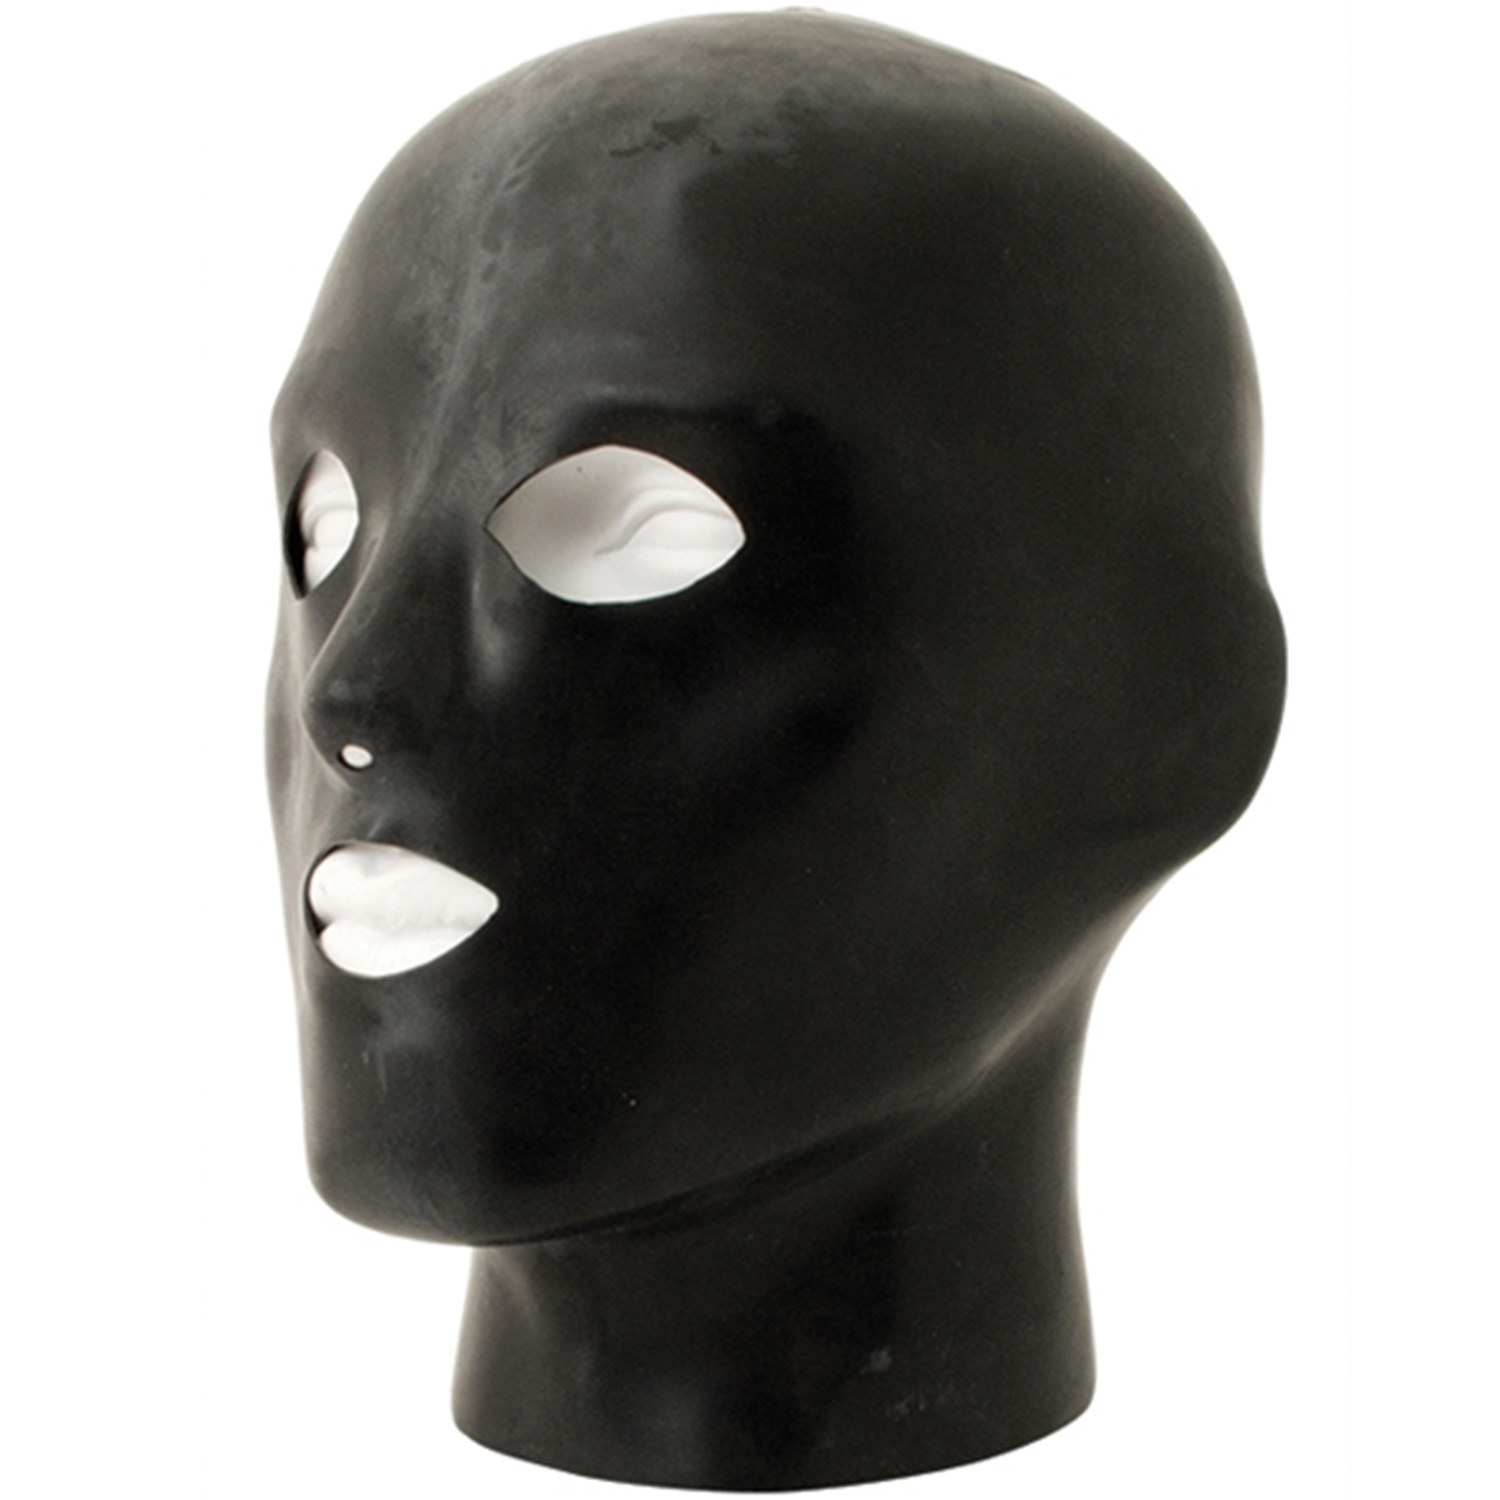 Mister B Rubber Heavy Duty Anatomical Hood With Holes - Black - L/XL